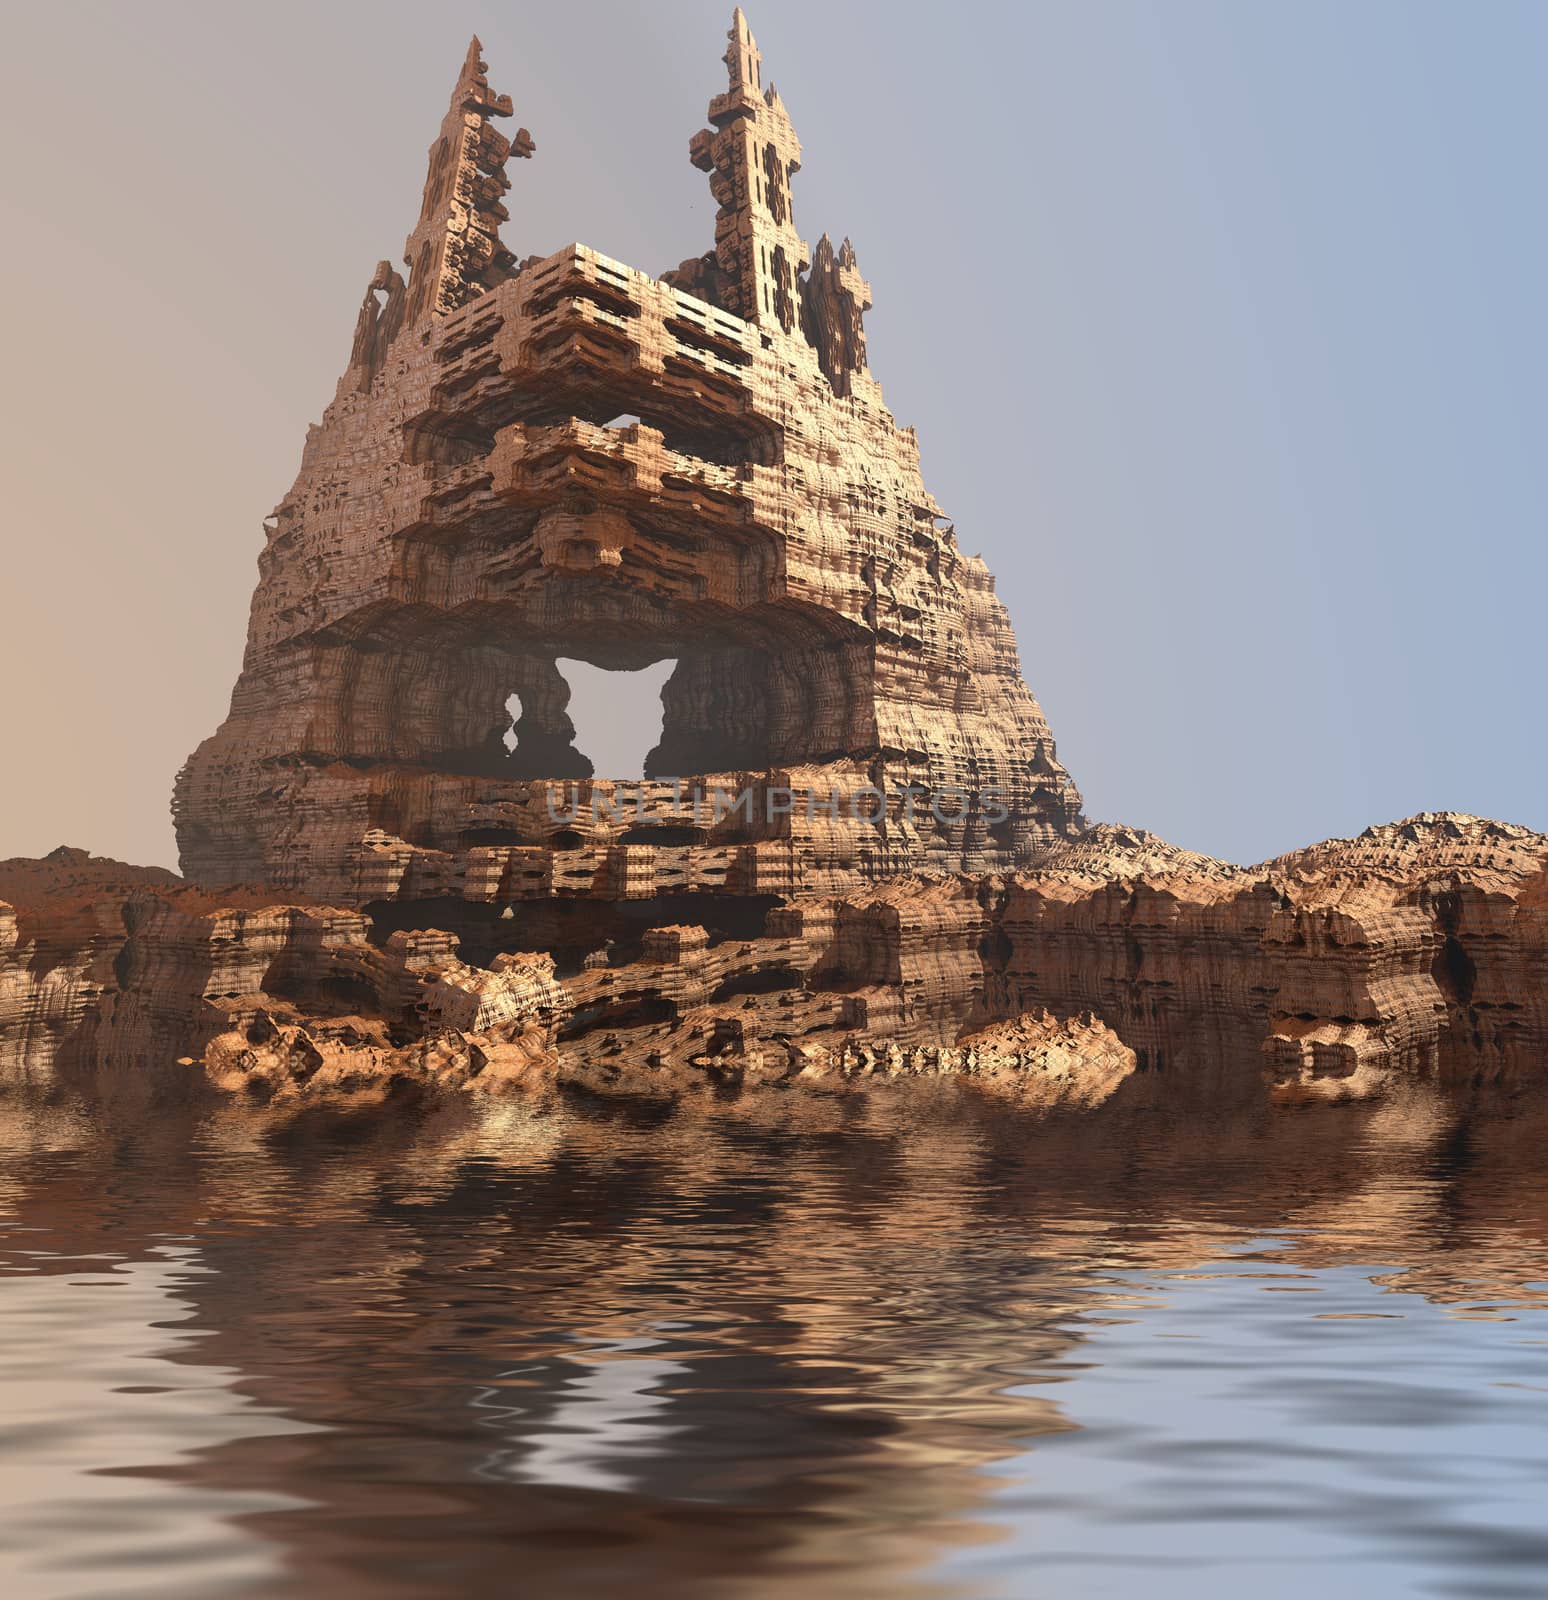 Computer rendered virtual scenery by stocklady